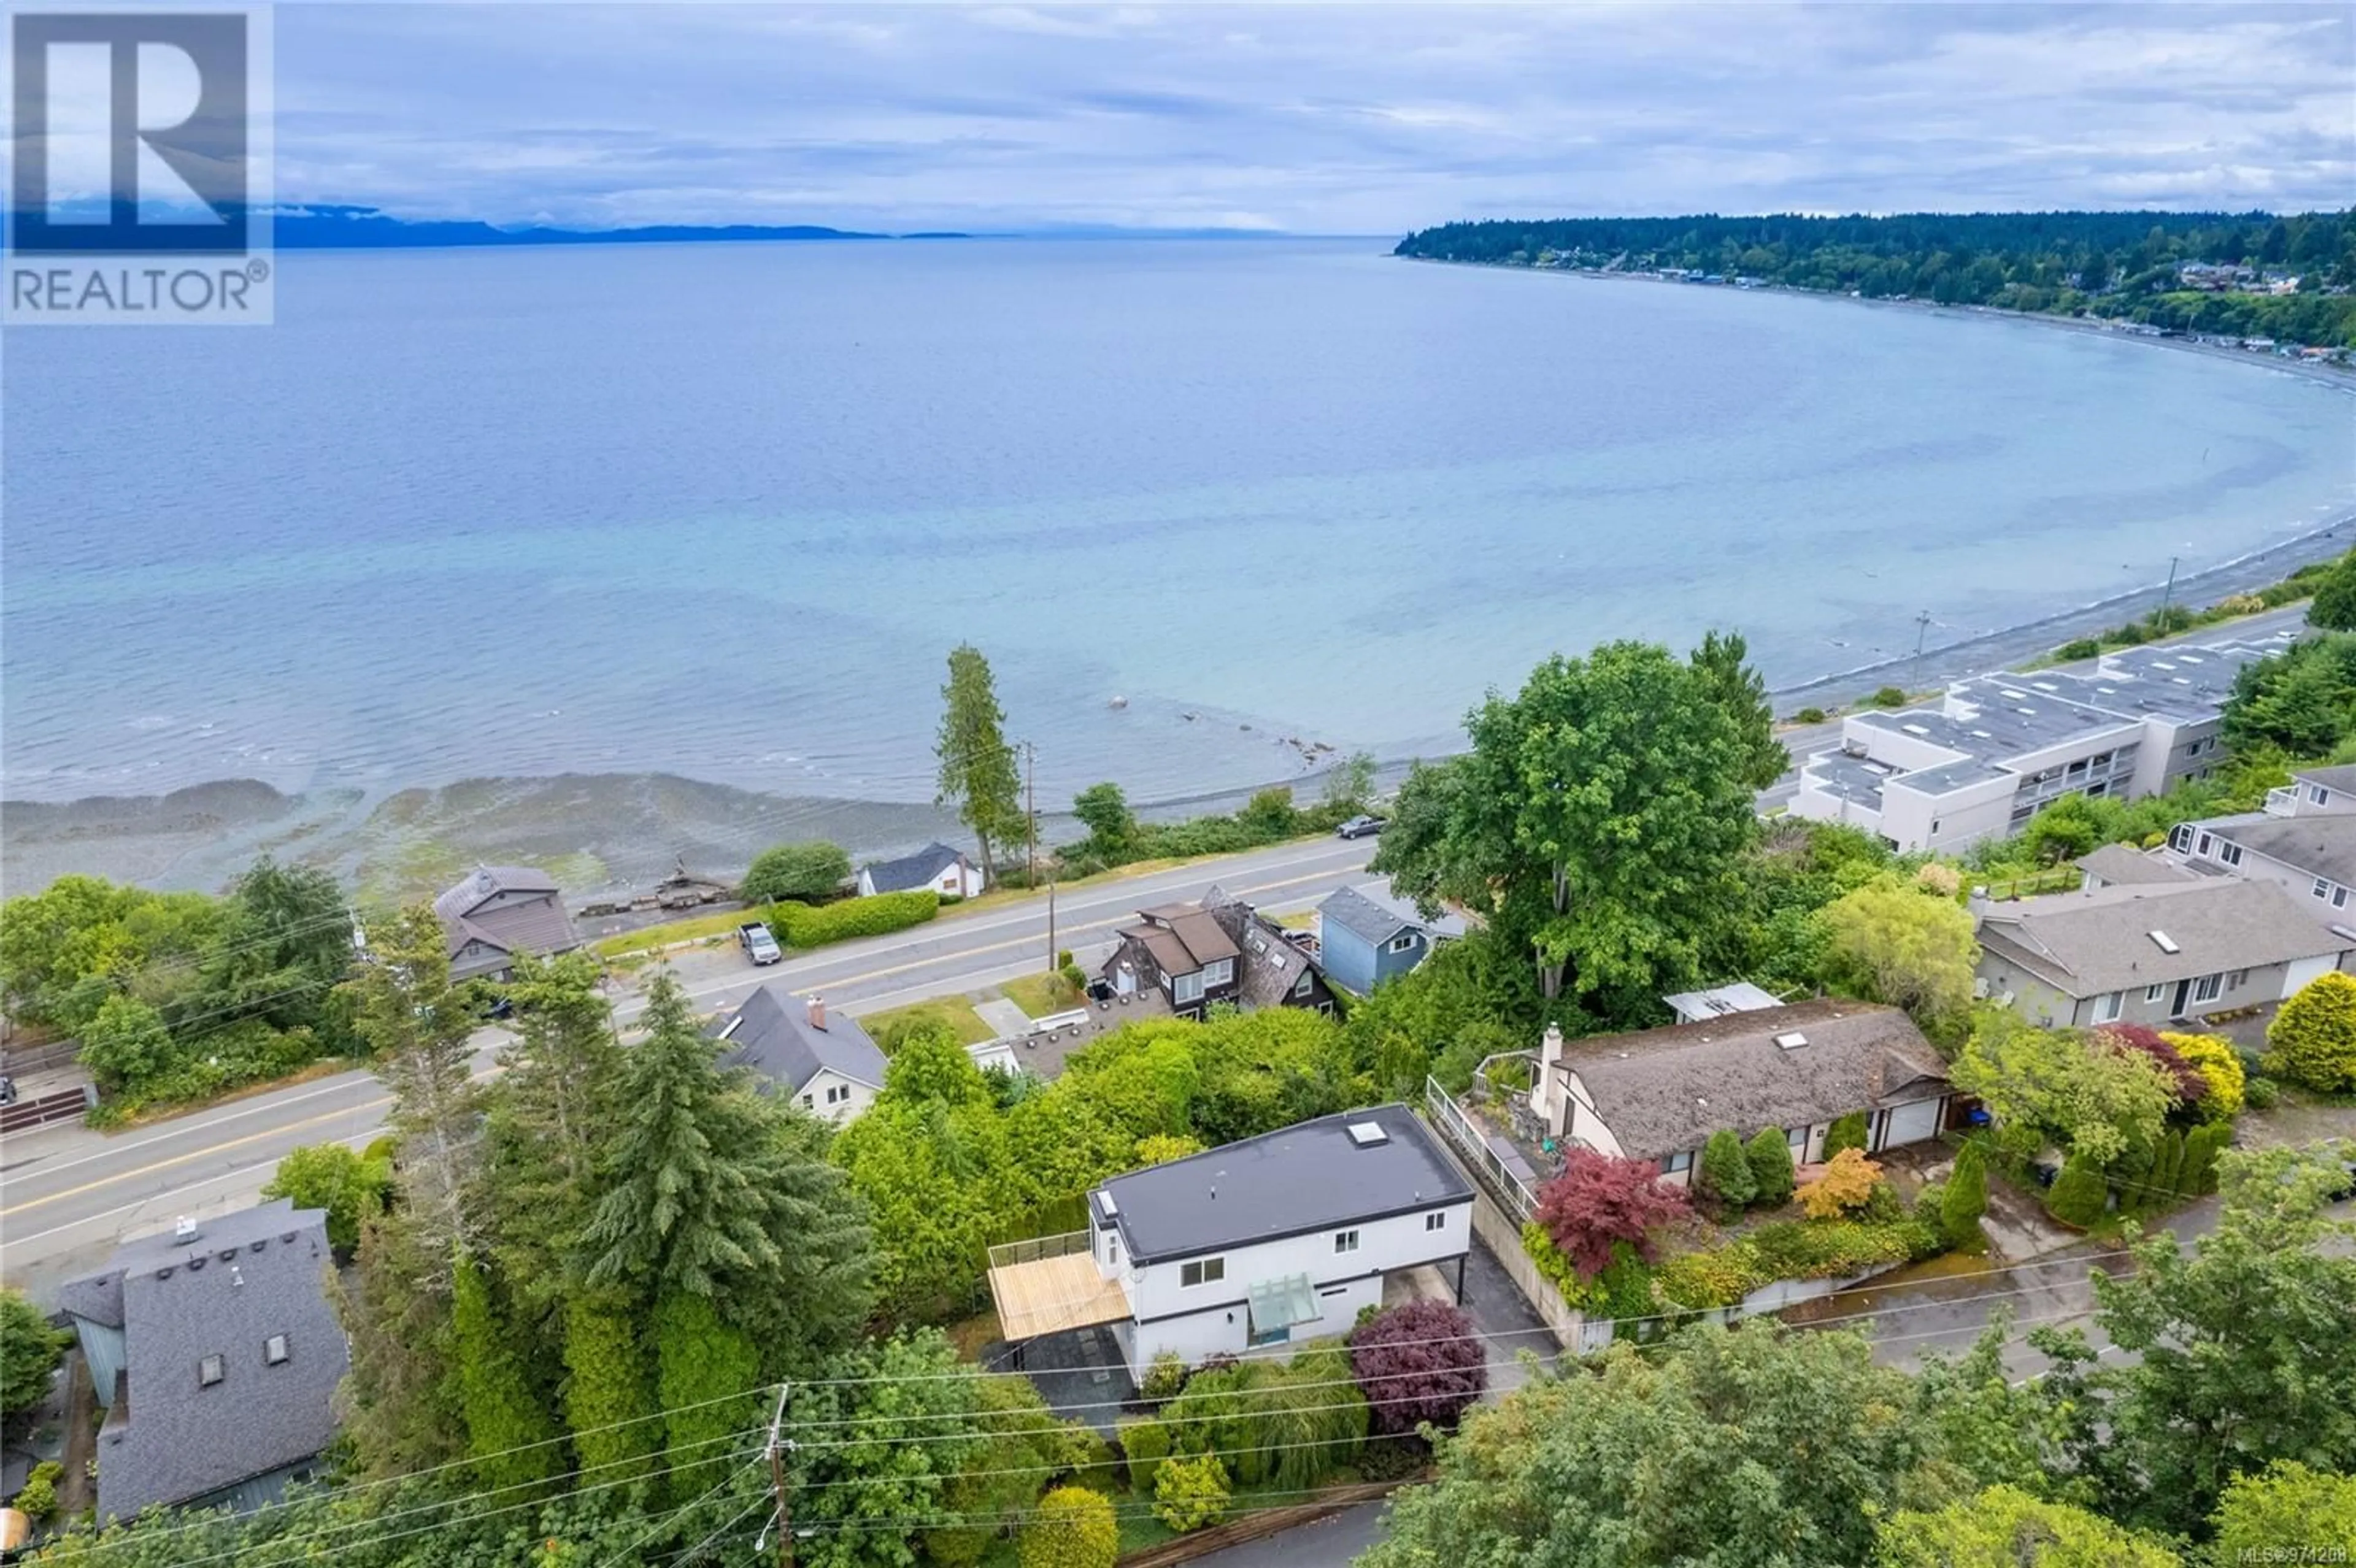 Lakeview for 595 Crescent Rd W, Qualicum Beach British Columbia V9K1H7